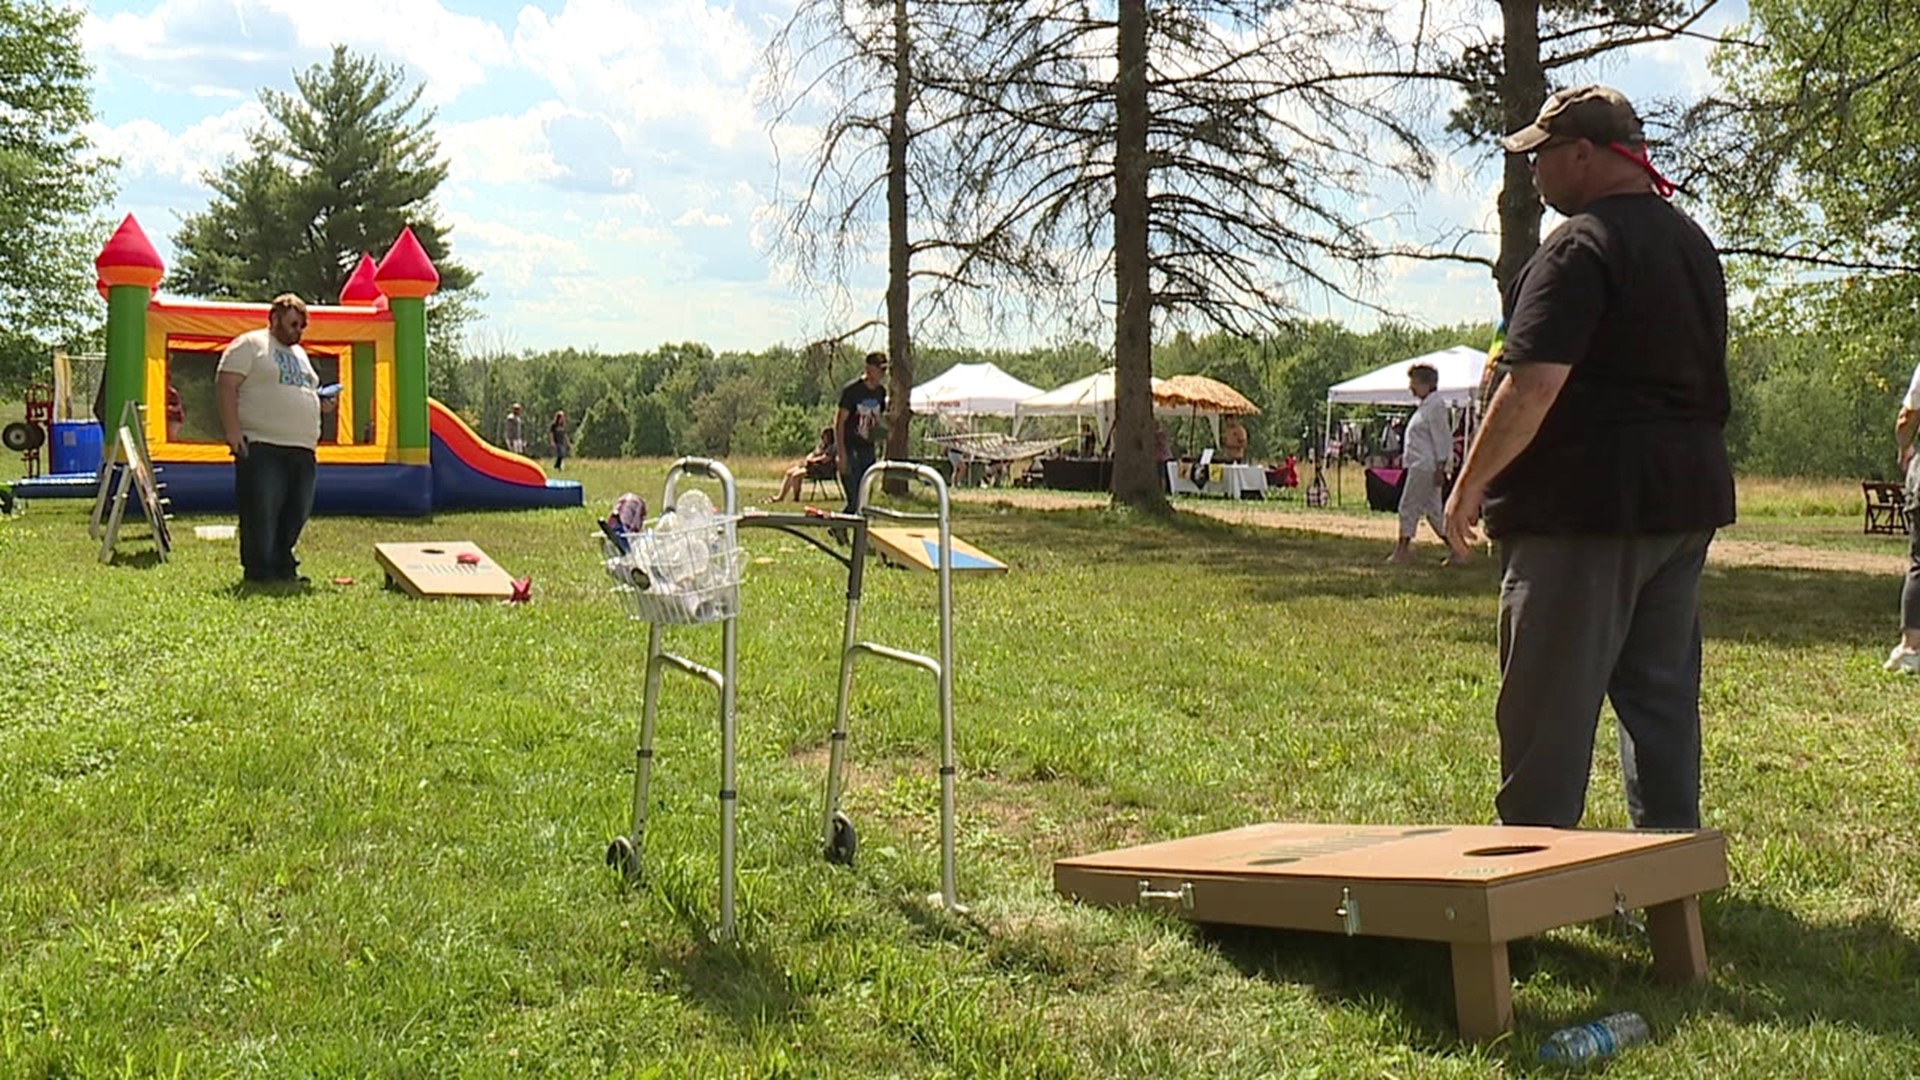 Camp Freedom in Carbondale celebrated the service and sacrifice of veterans at the 4th Annual Summer Salute.